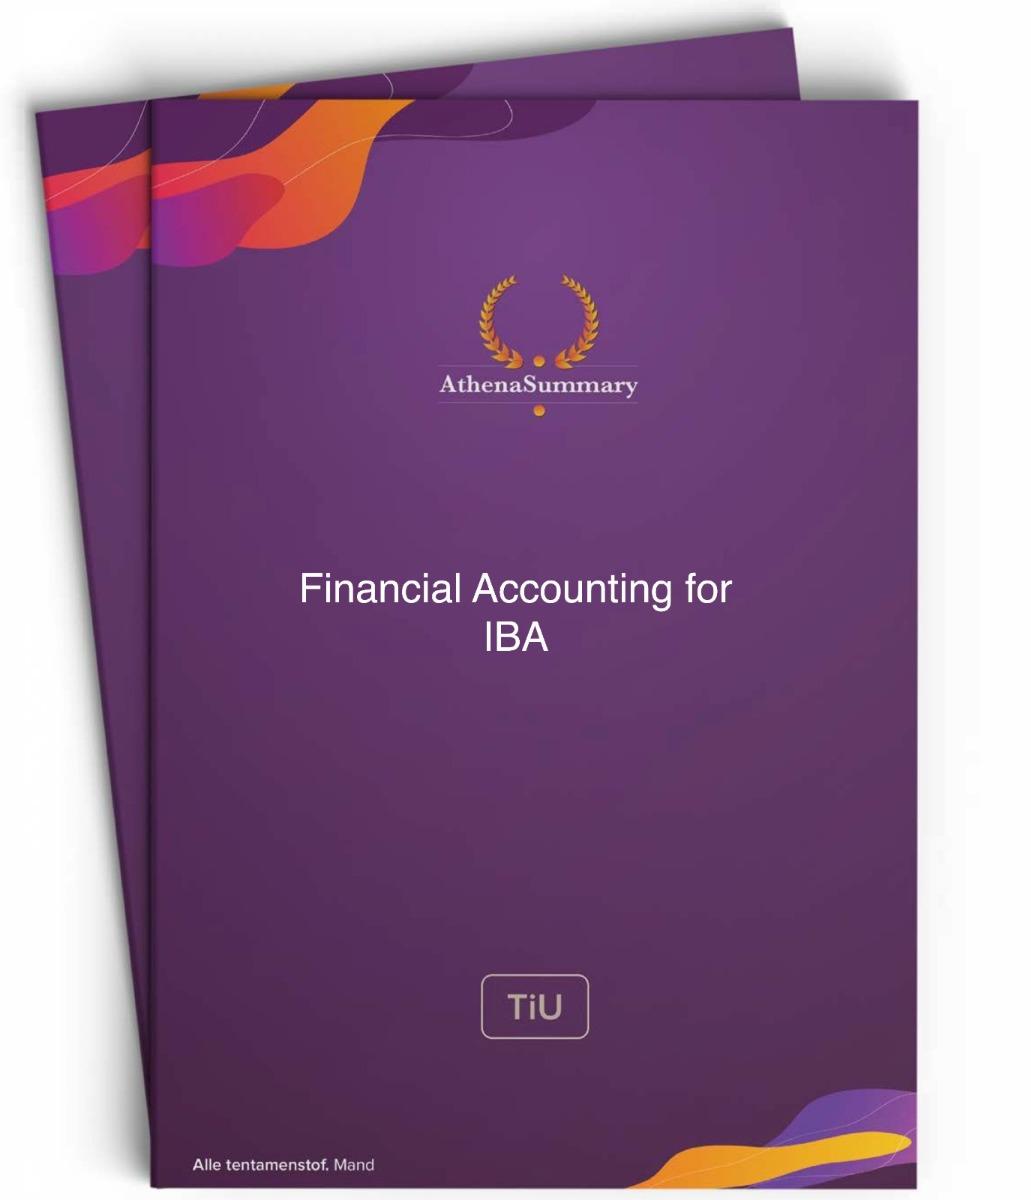 Literature and Lecture Summary: Financial Accounting for IBA